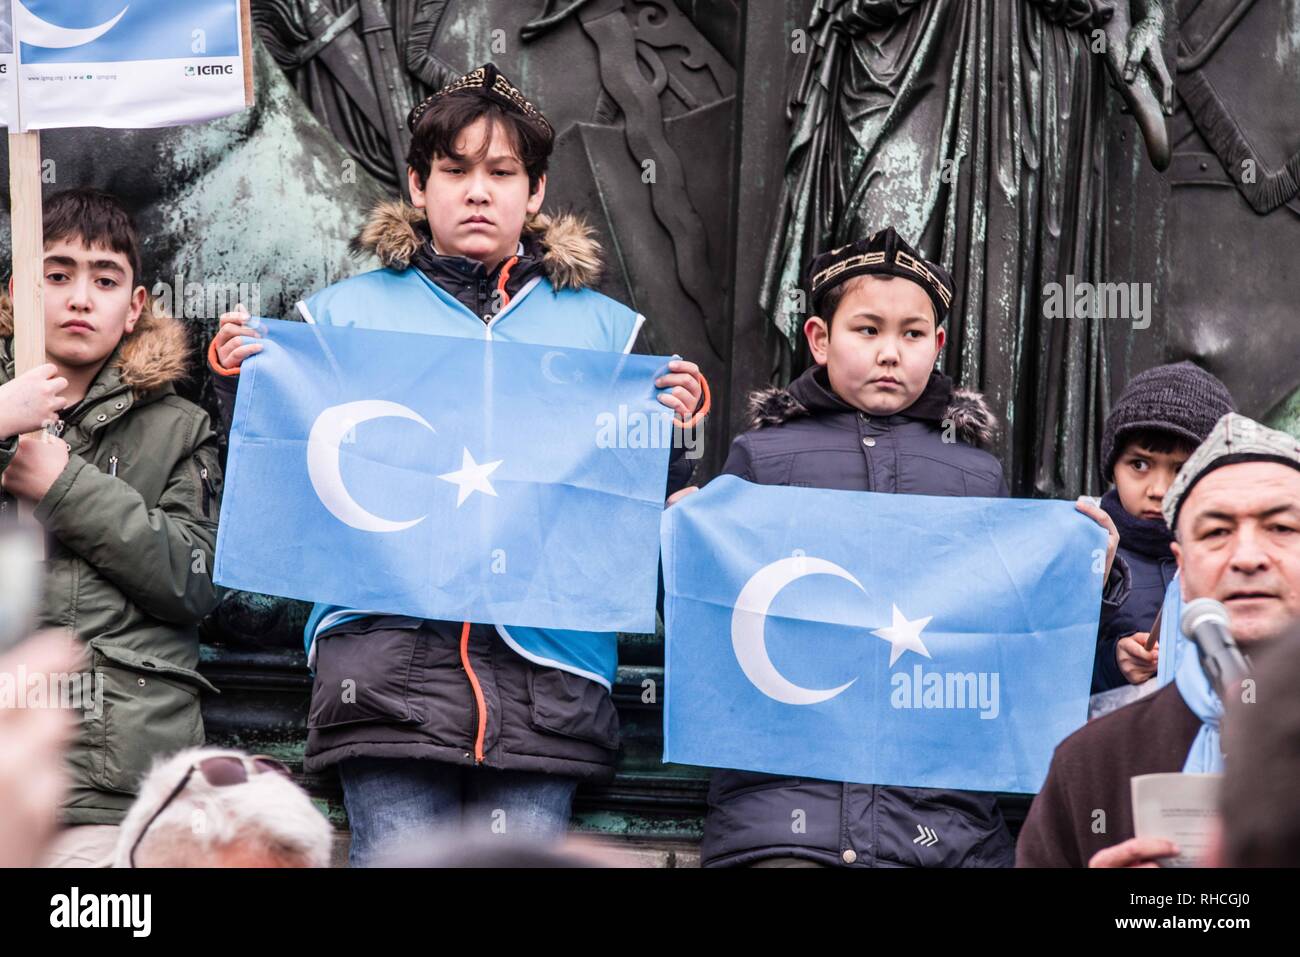 Munich, Bavaria, Germany. 2nd Feb, 2019. Uyghur children in Germany protesting with the flag of East Turkestan, which is also known as the Xinjiang Autonomous Province. to protest against the so-called "Muslim Crackdown"" by the Chinese Communist Party in the Xinjiang Autonomous Region of China. The region is contains roughly 26 million people, 11 million of whom are the ethnically Turkic Uyghurs who still call the region East Turkistan . The CCP has placed upwards of 1 million Uyghurs in reeducation ca Credit: ZU Credit: ZUMA Press, Inc./Alamy Live News Stock Photo